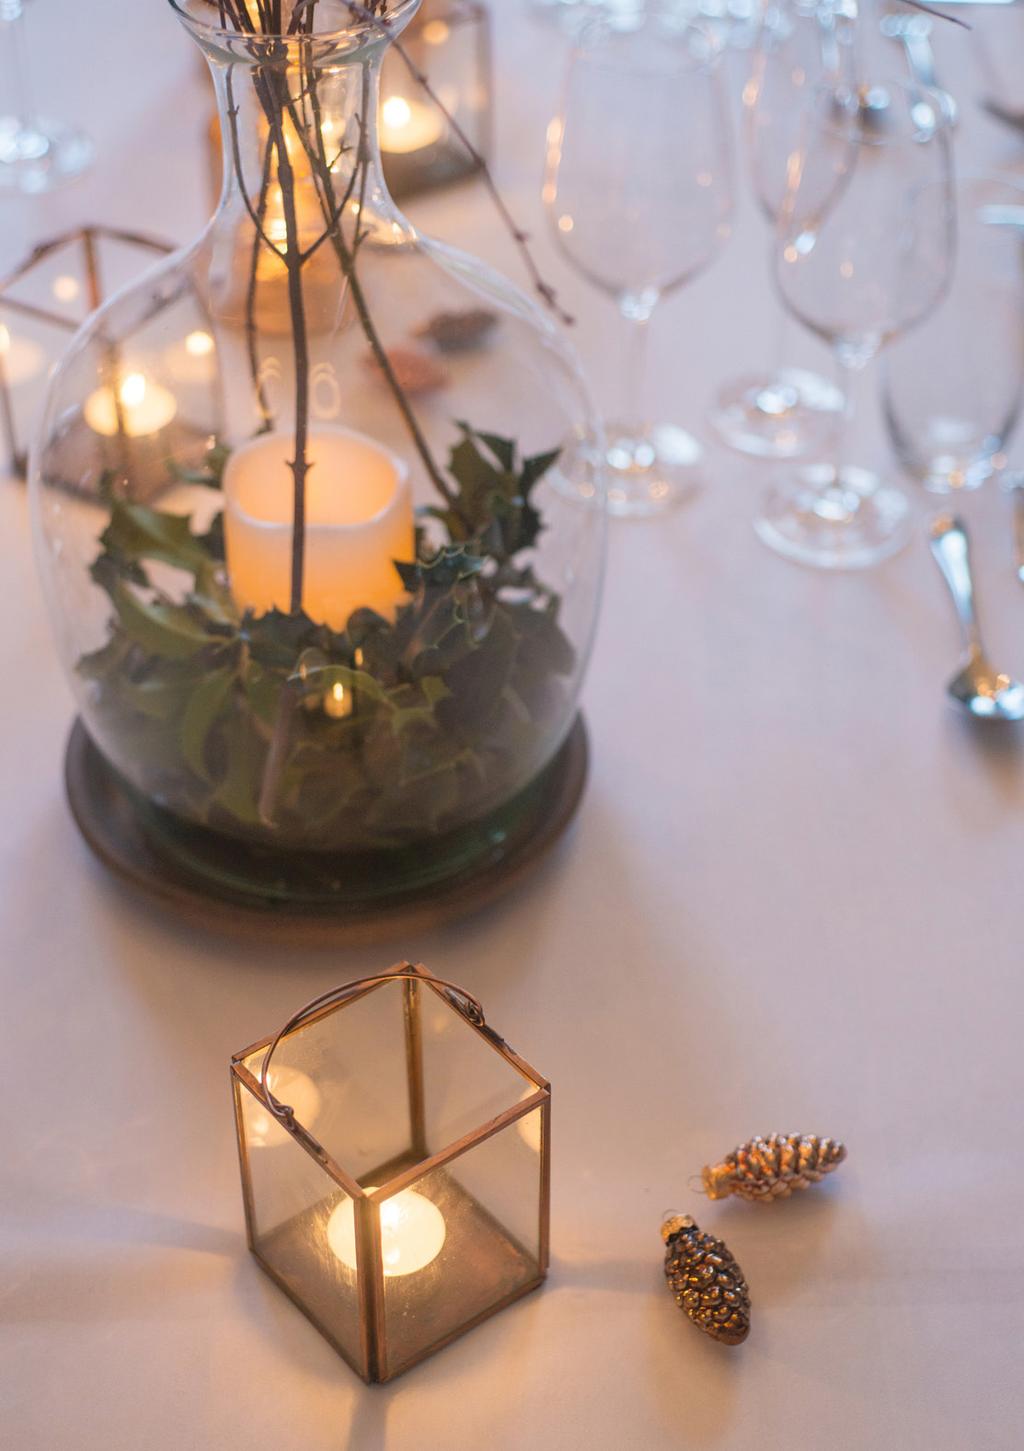 P ARTIES & EVENTS Celebrate Christmas with a festive gathering at Cowley Manor.